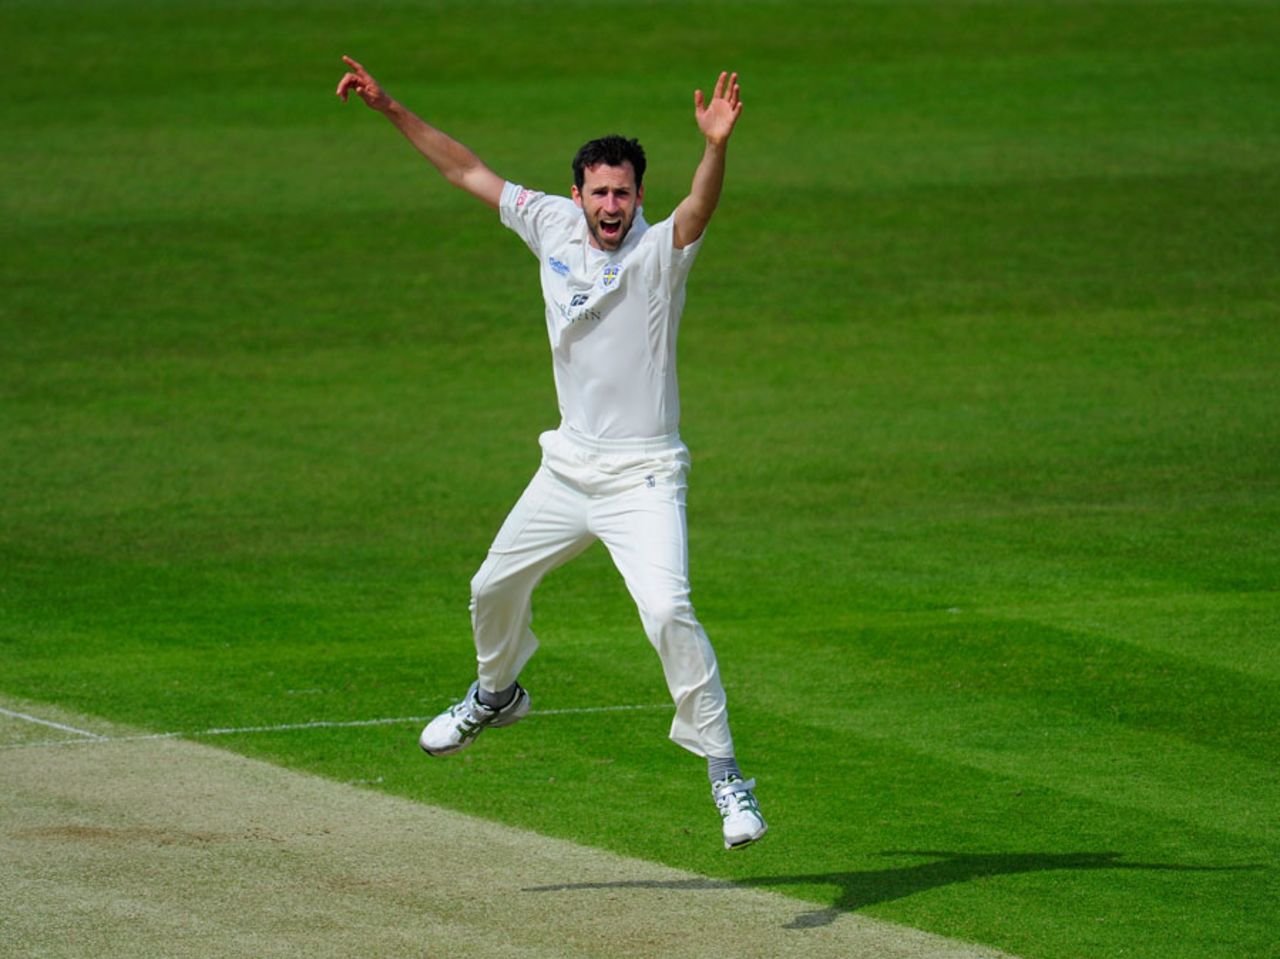 Graham Onions celebrates taking a wicket, Durham v Somerset, County Championship, Division One, 1st day, Chester-le-Street, May 9, 2012